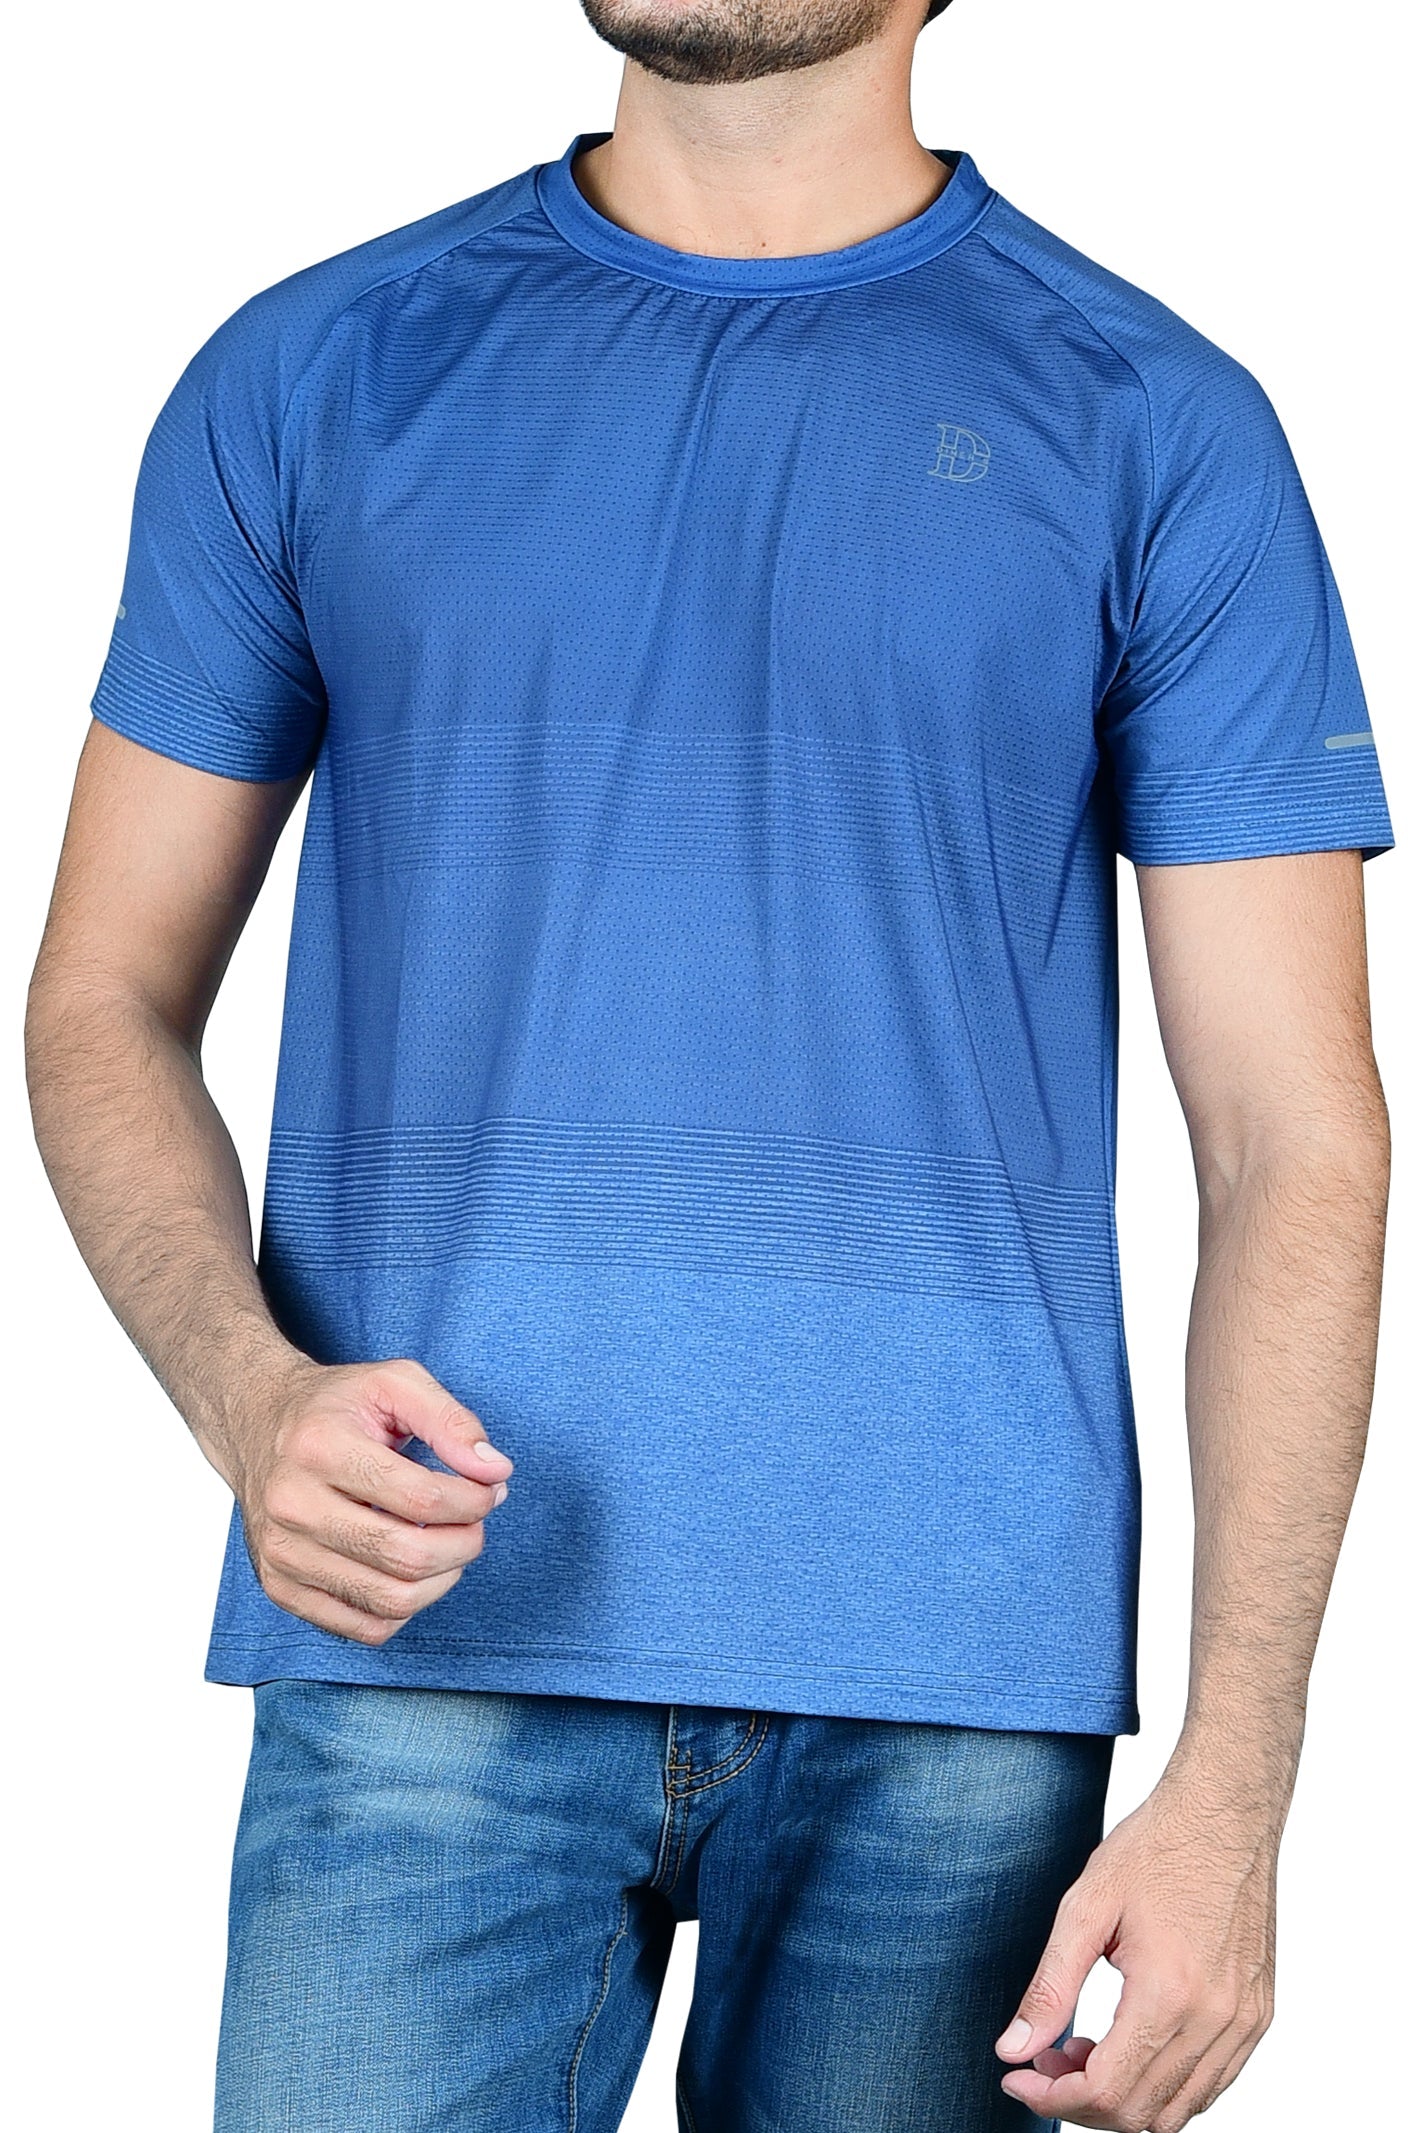 ROUND NECK T-SHIRT - NA643- R-Blue - Diners